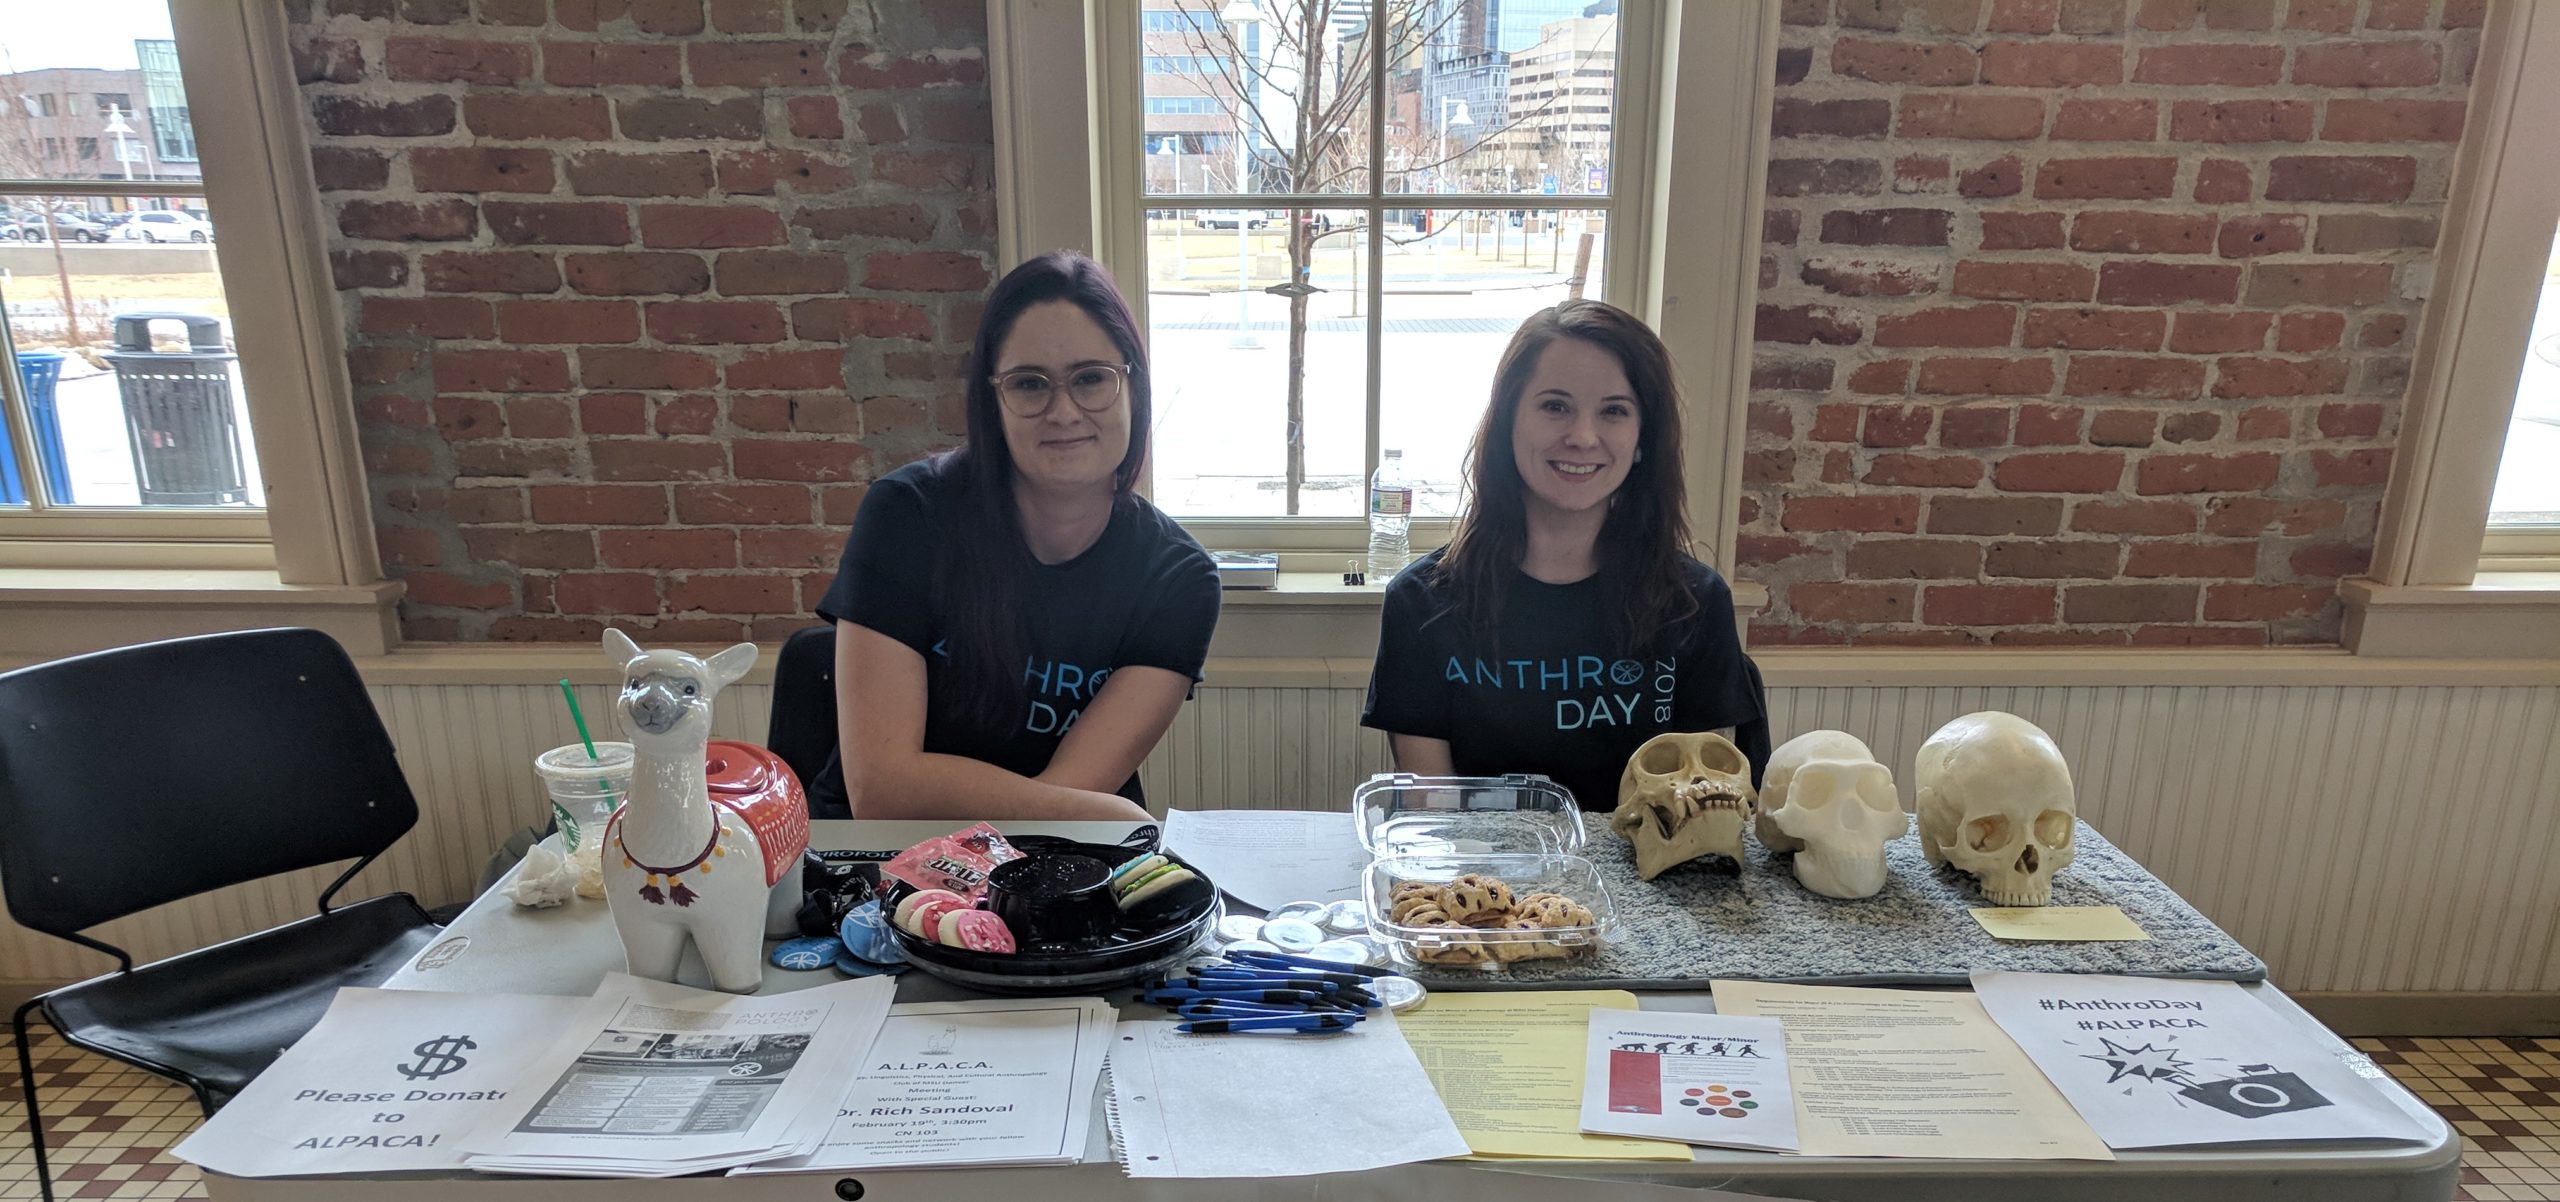 Students at Anthropology Day table 2-15-2018.